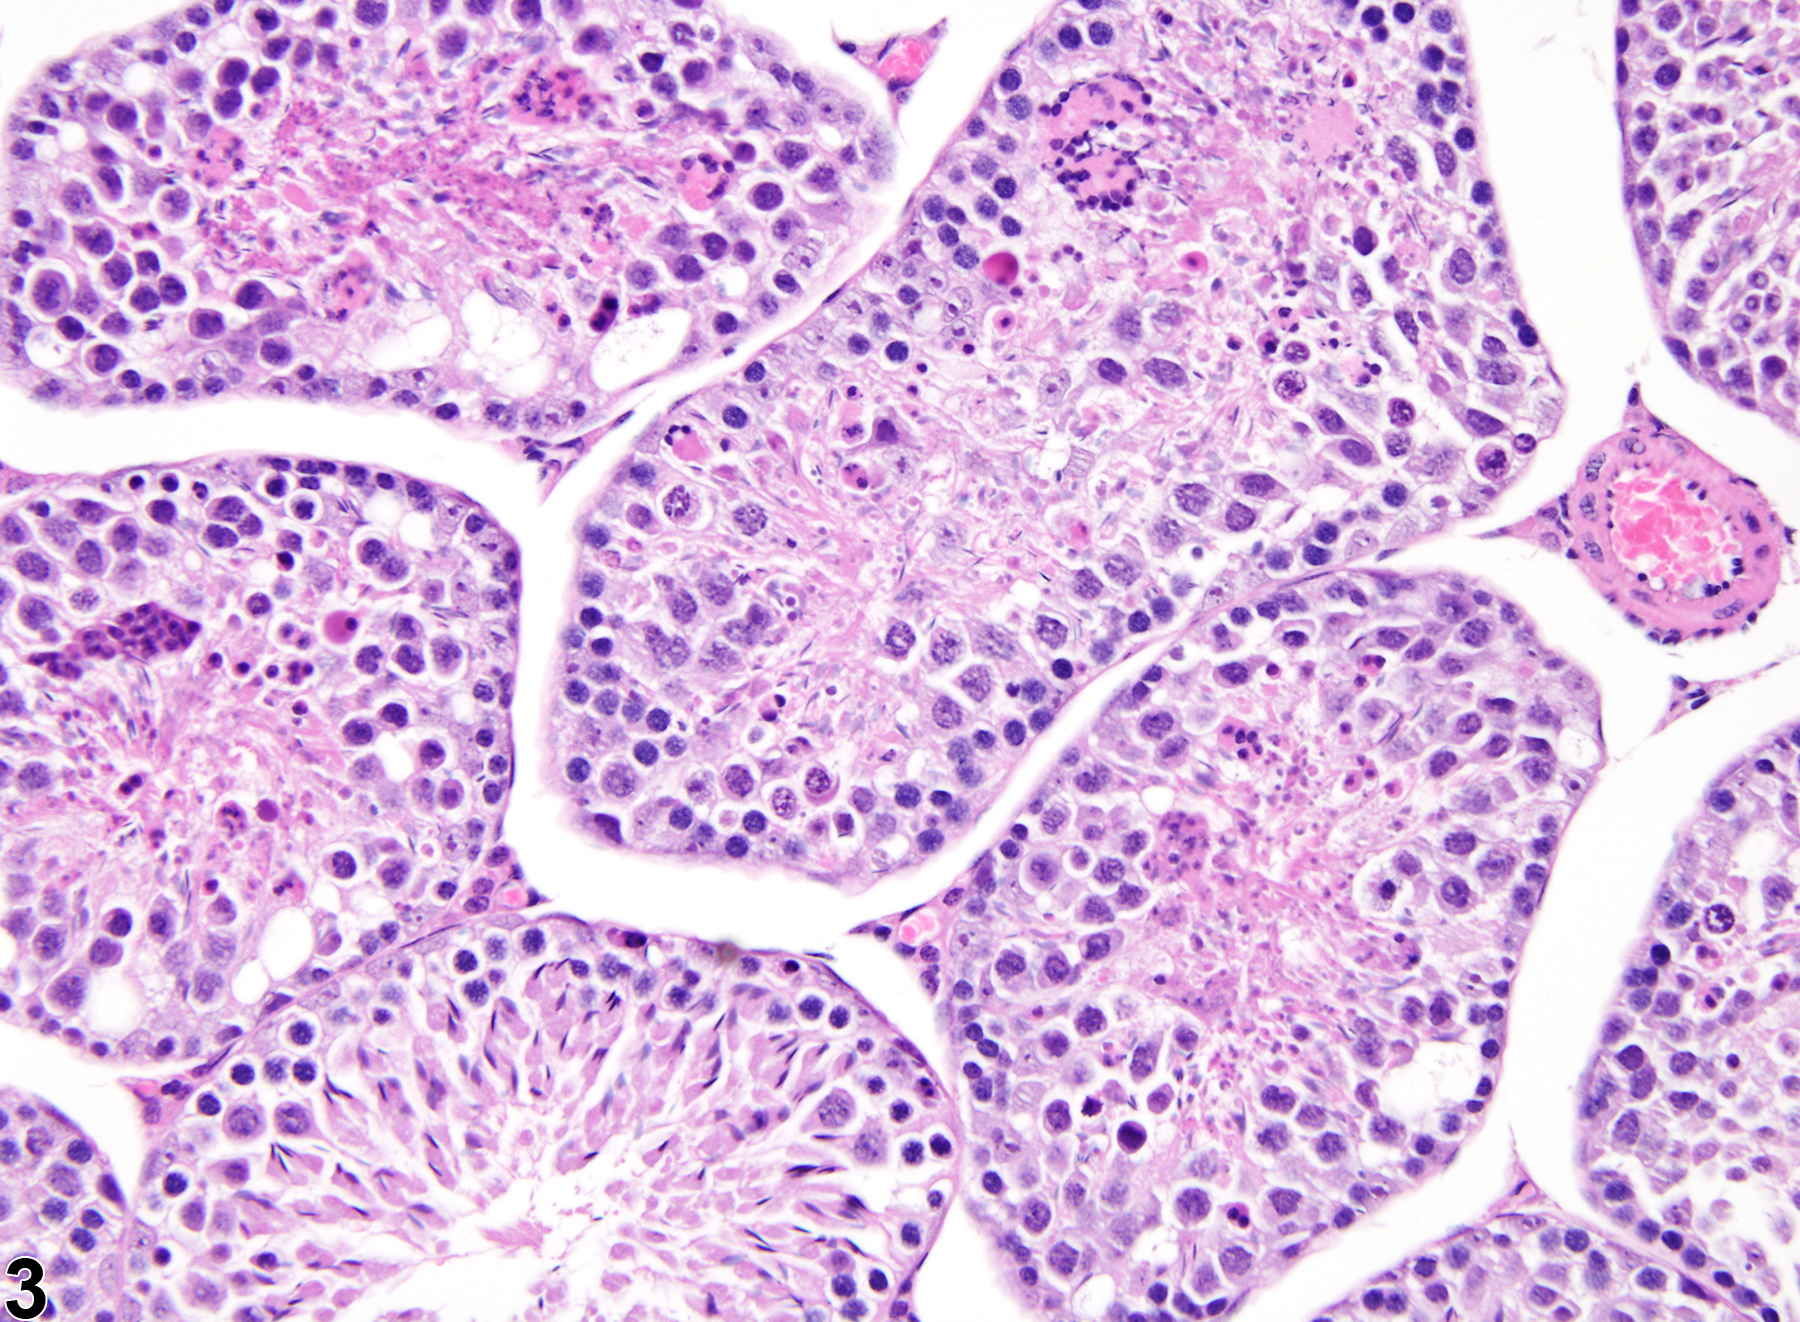 Image of germinal epithelium degeneration in the testis from a male B6C3F1 mouse in a subchronic study